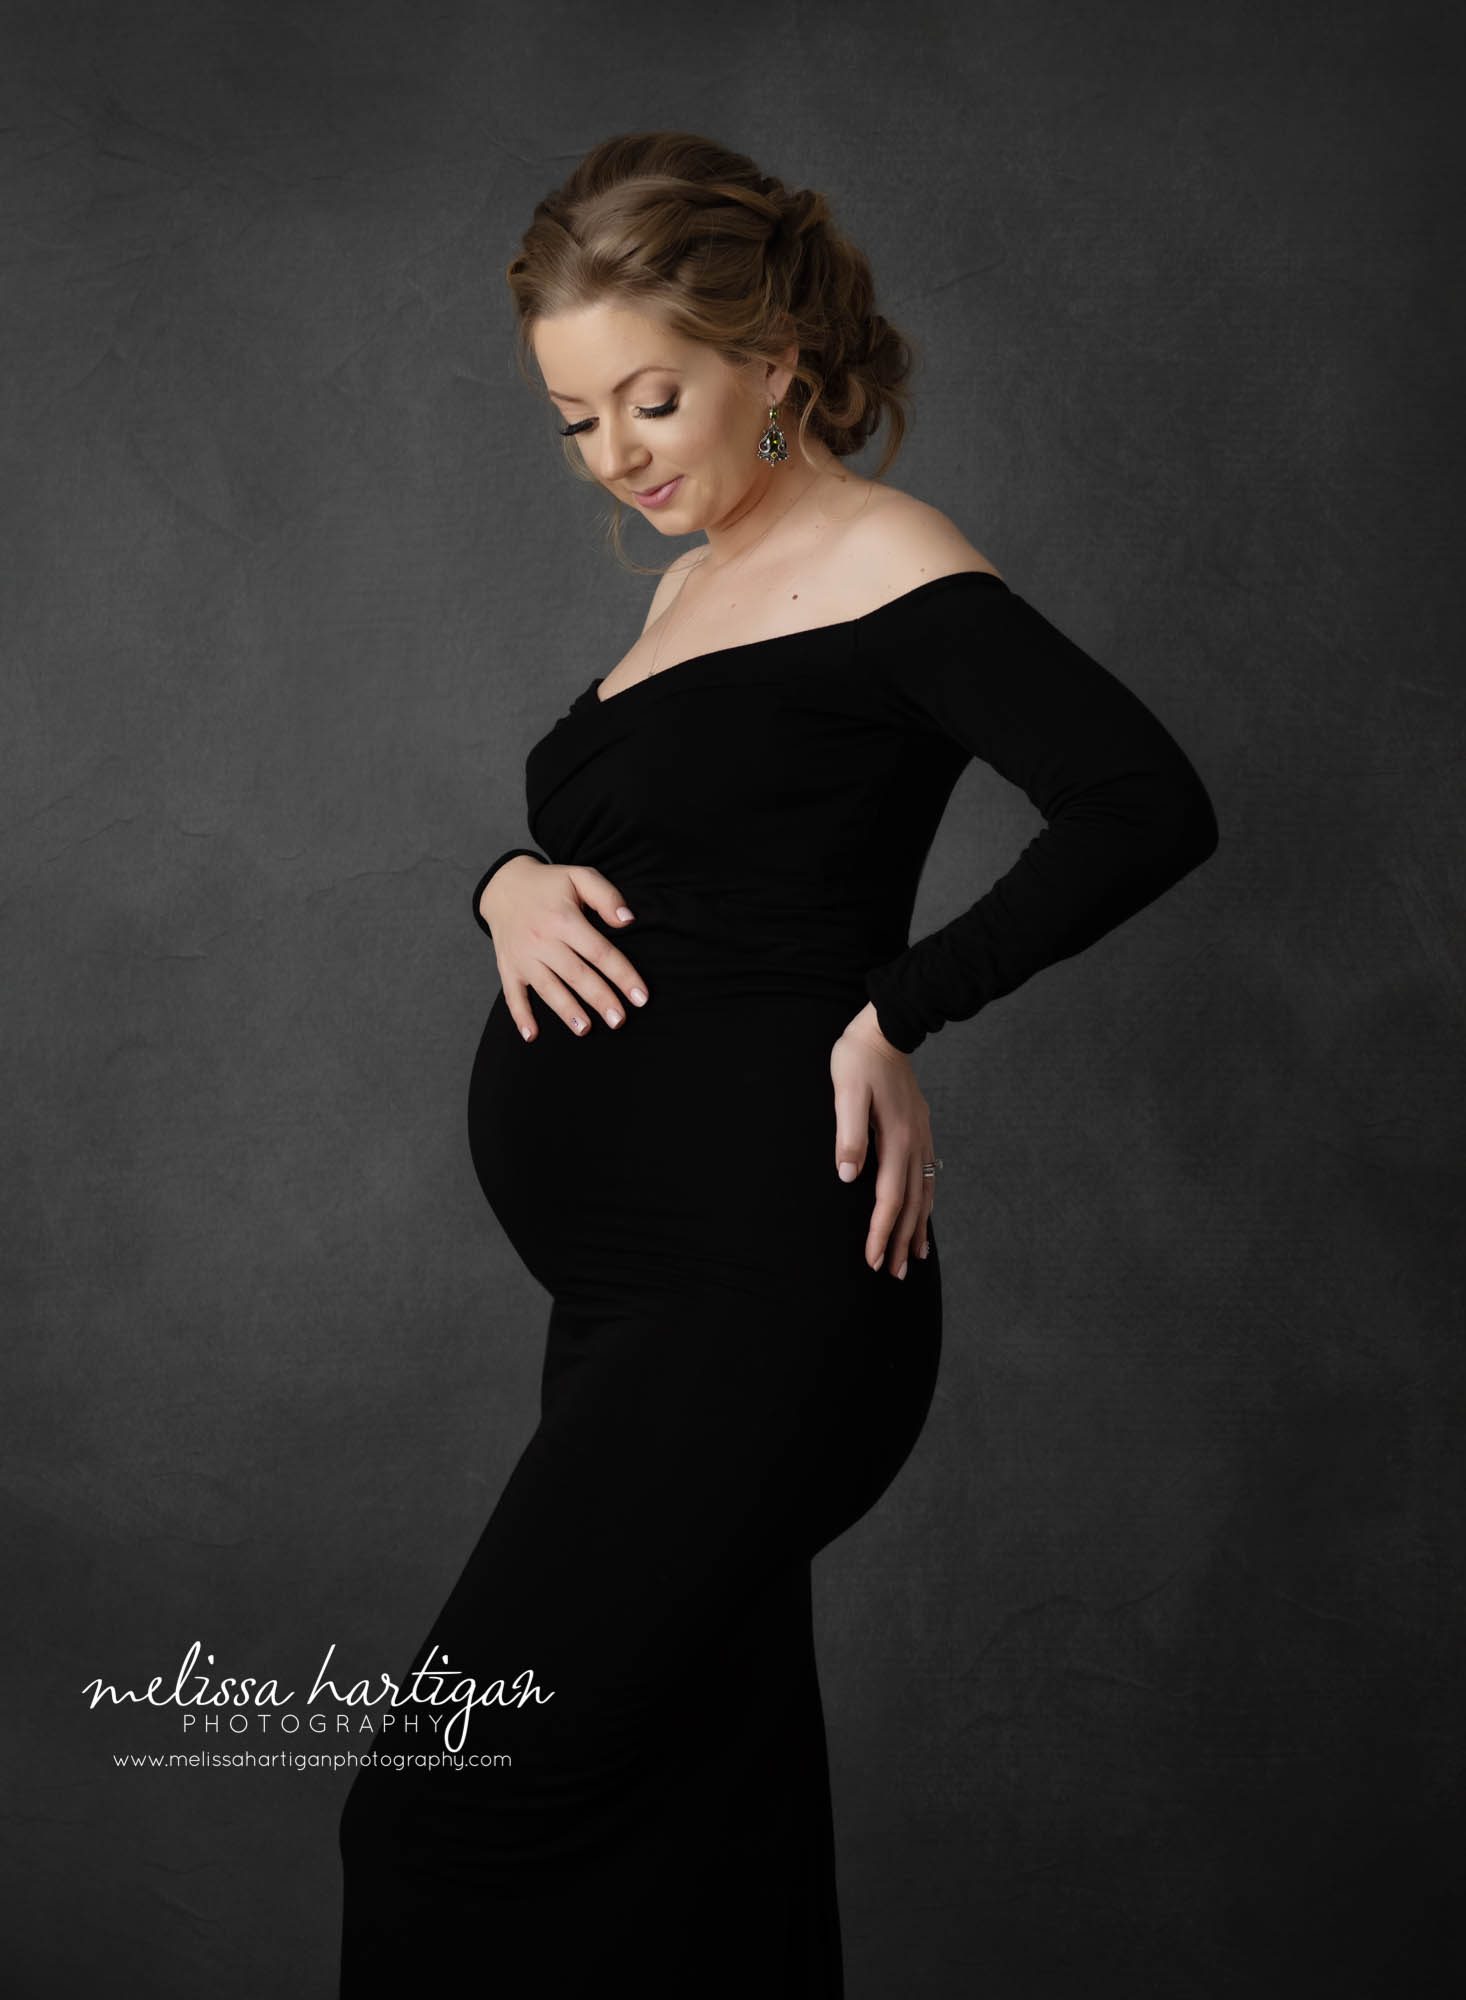 Pregnant mom standing maternity photography pose holding baby bump looking down at belly